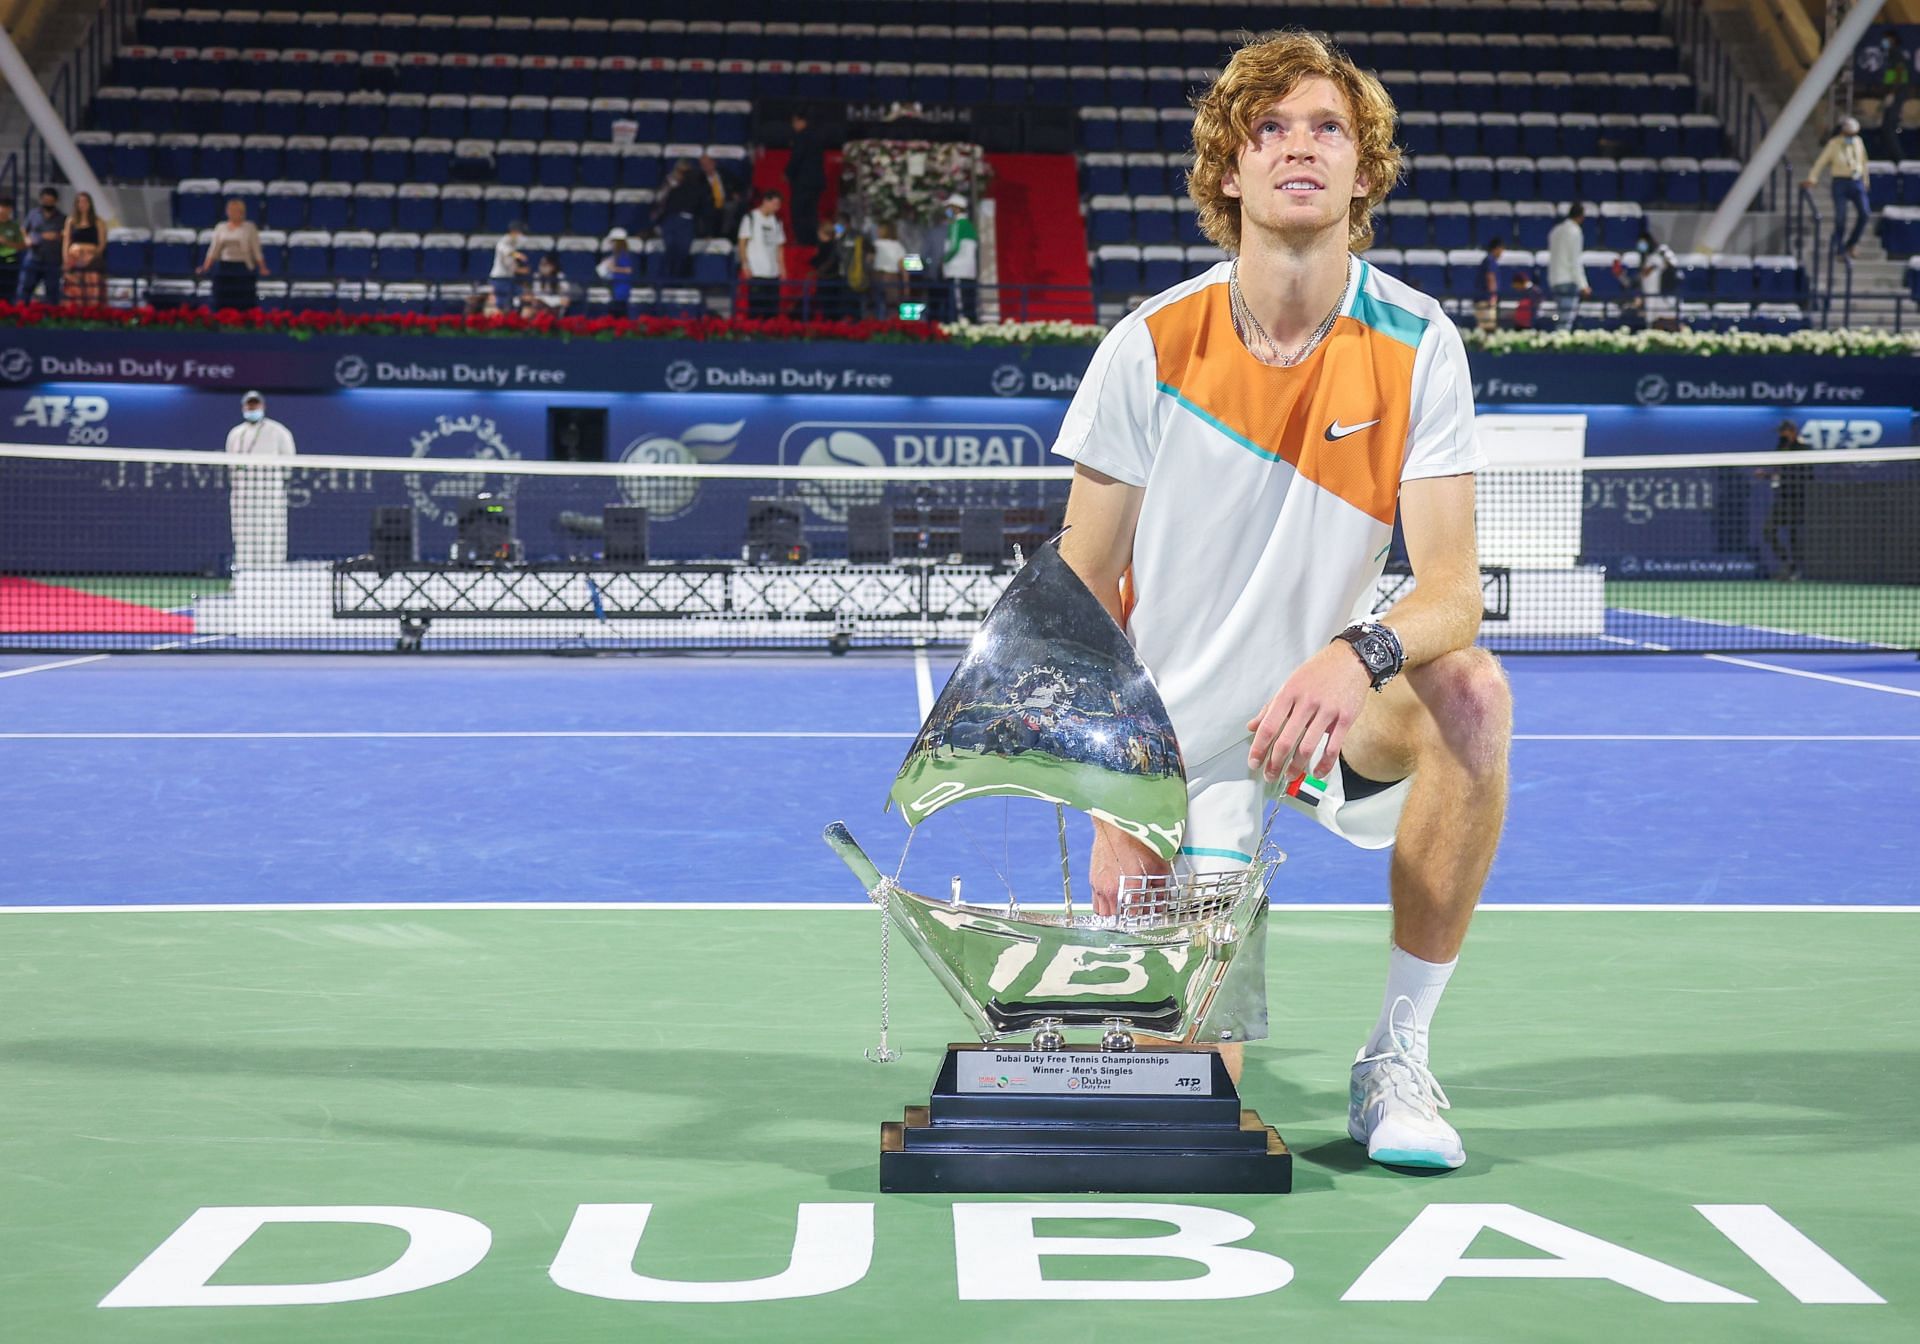 Andrey Rublev has won three titles this year